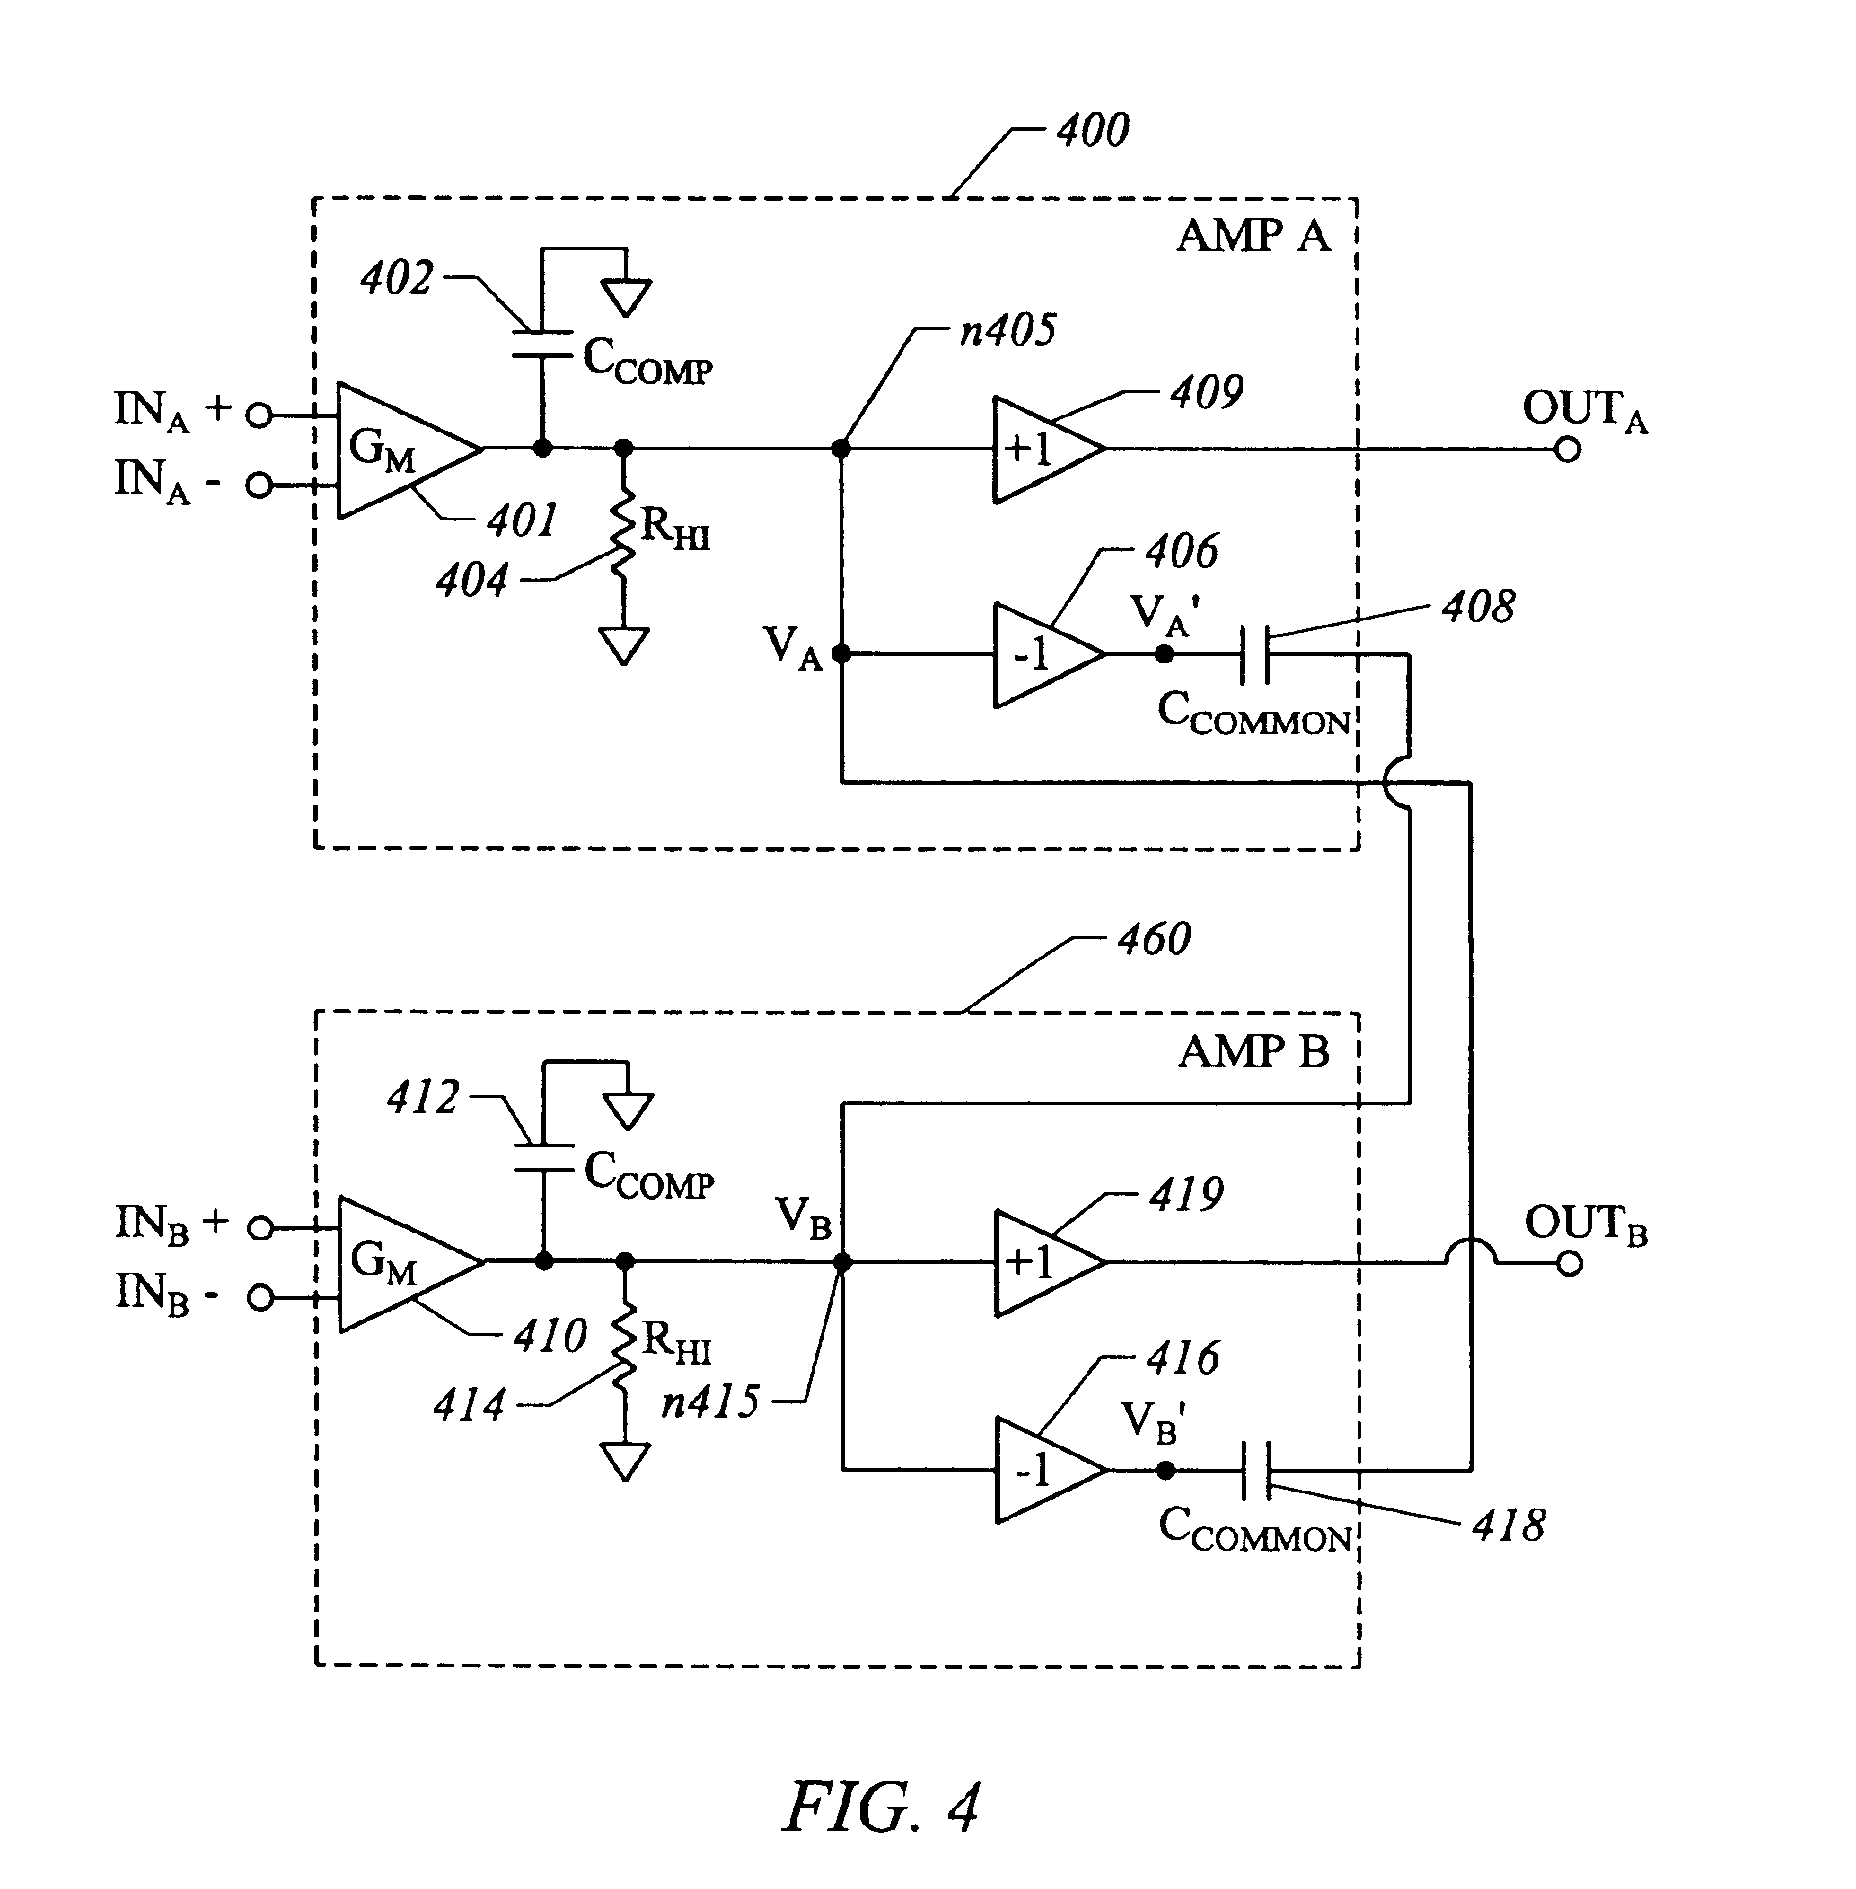 Common-mode and differential-mode compensation for operational amplifier circuits